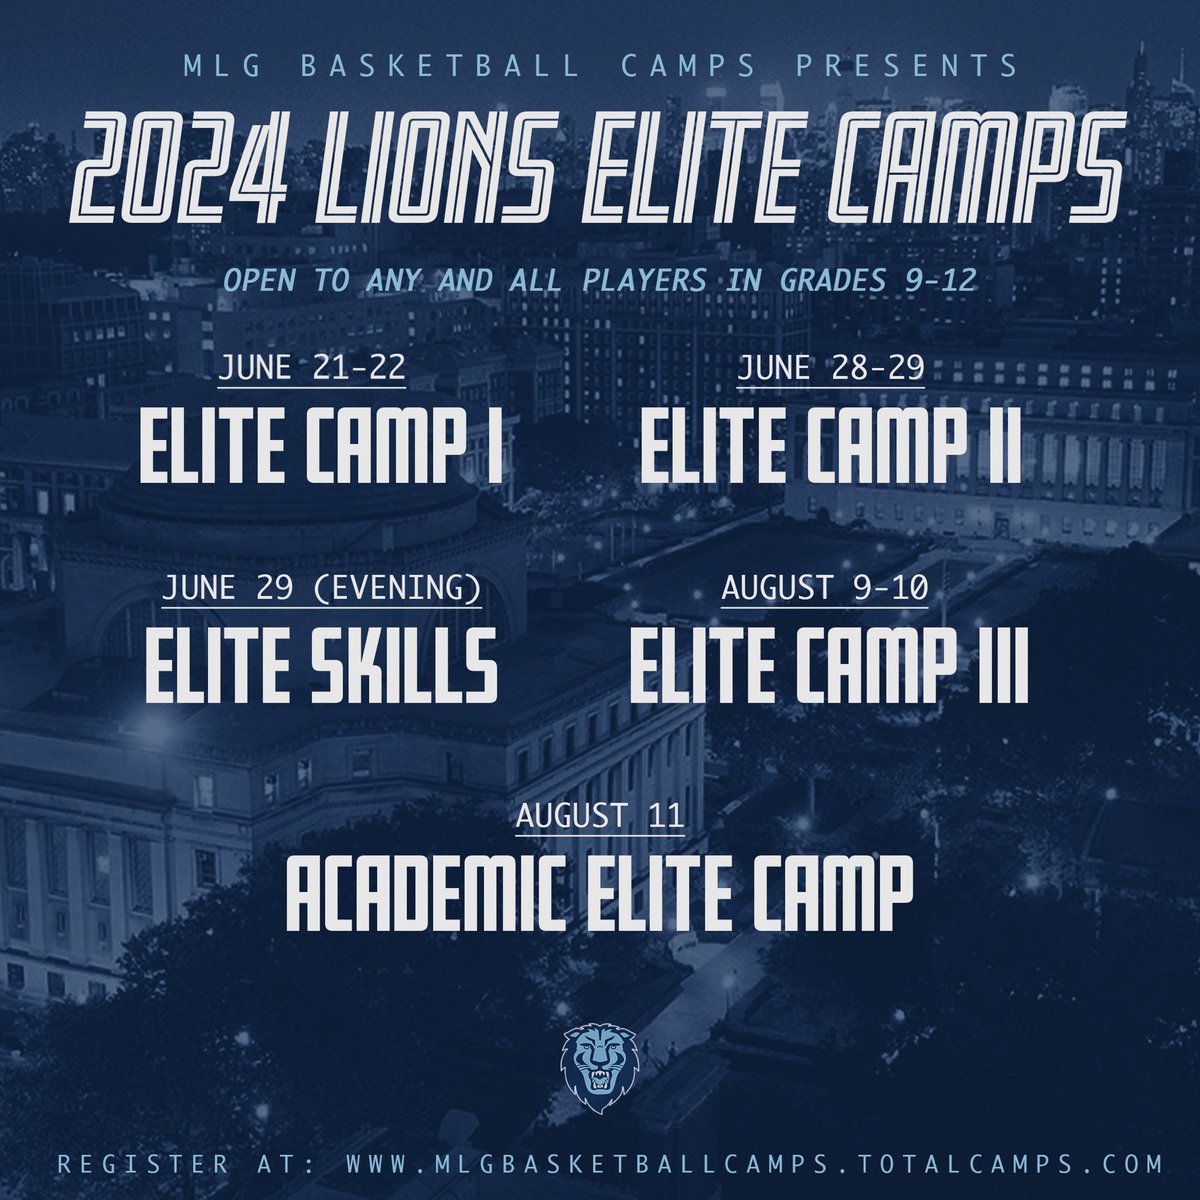 The #LightBlueCrew is ready for you! 🏀💪 Join us in NYC this summer to train with the best in the game 🗽 Link below register for our Elite Camps! ⬇️ mlgbasketballcamps.totalcamps.com #EDGE // #EmpireStateOfMind